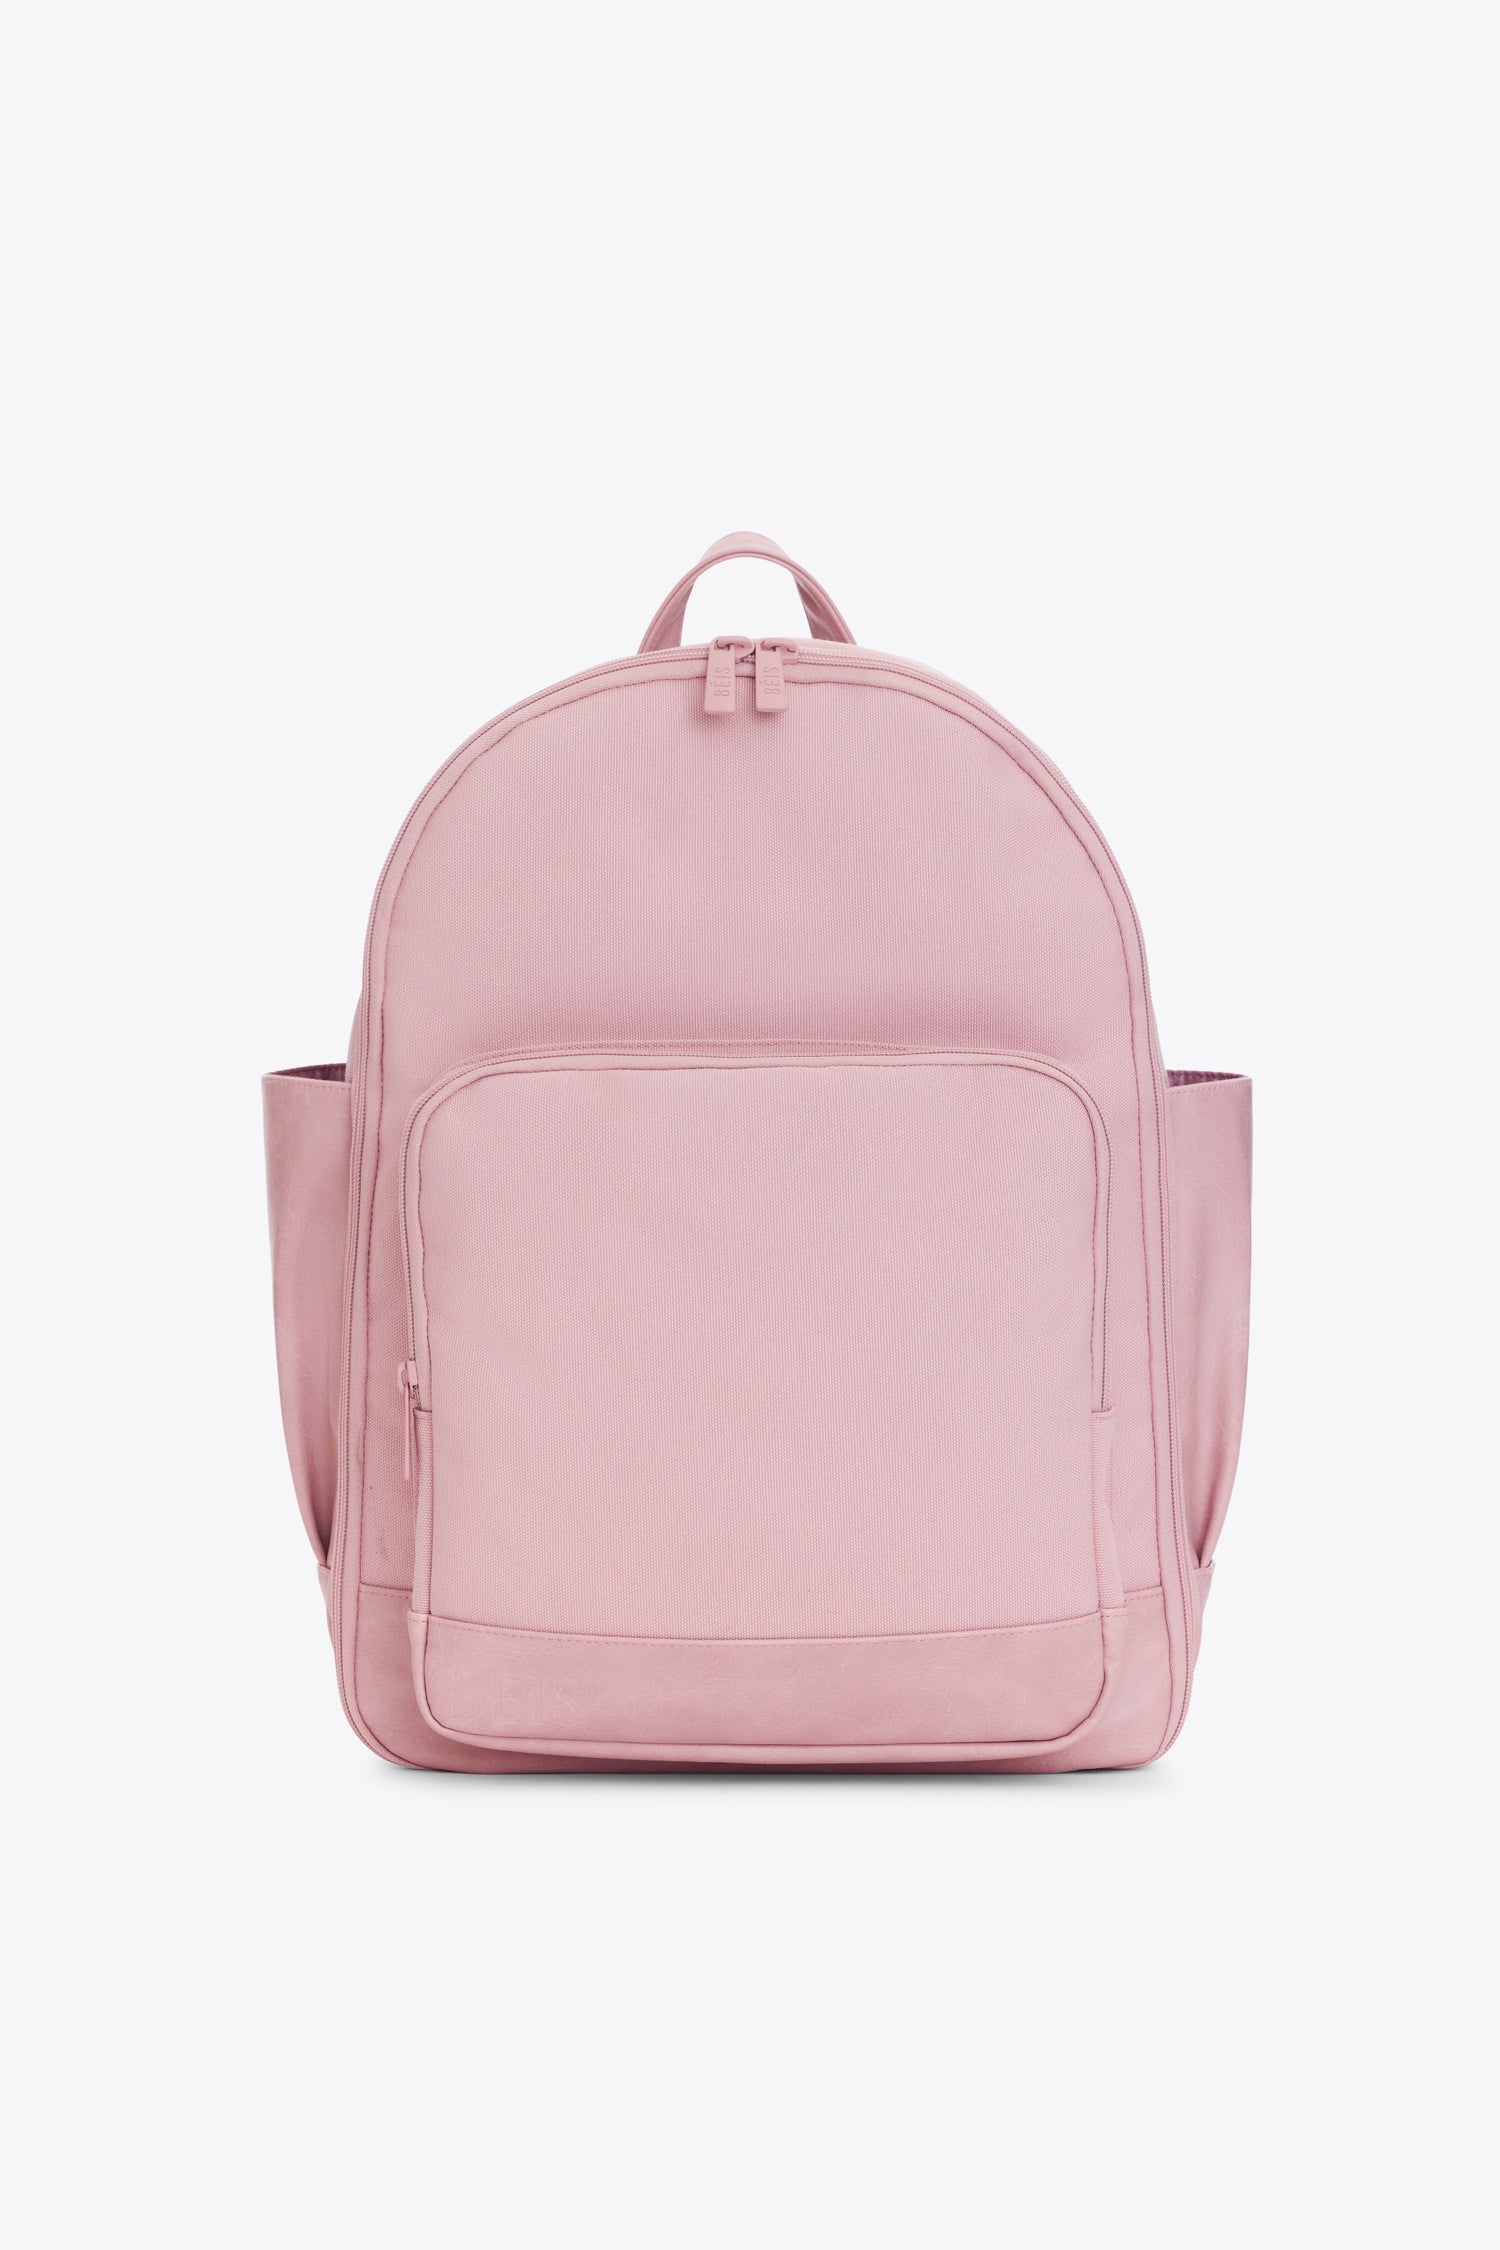 The Atlas Pink Collection